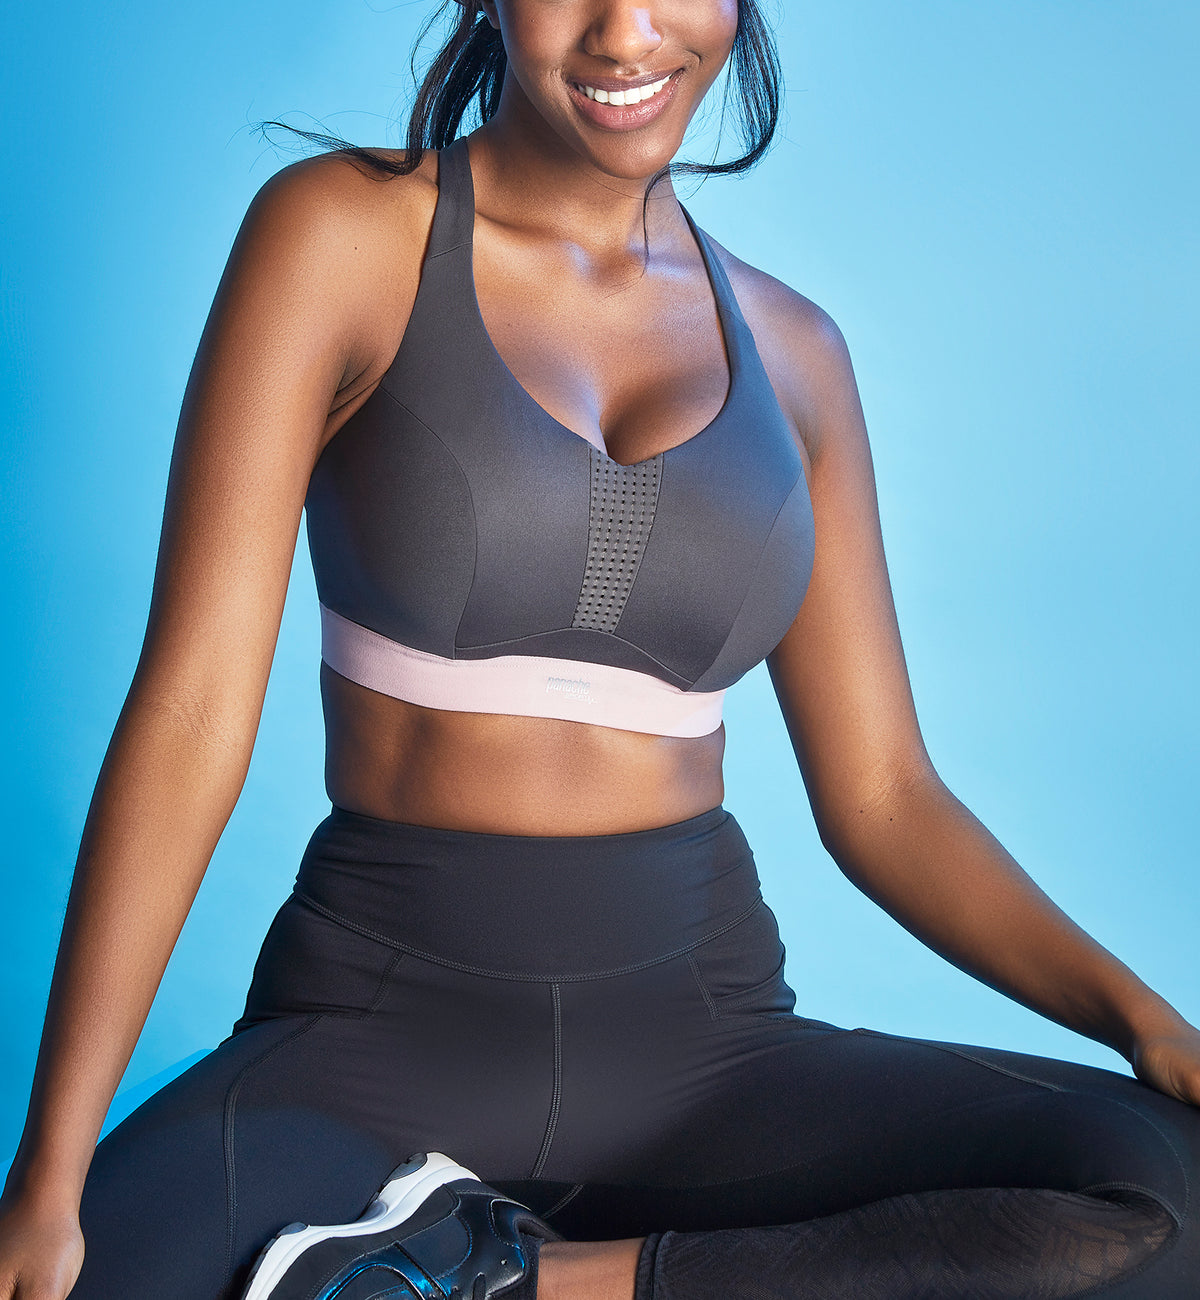 Panache Ultra Perform Non-padded Underwire Sports Bra (5022)- Charcoal -  Breakout Bras